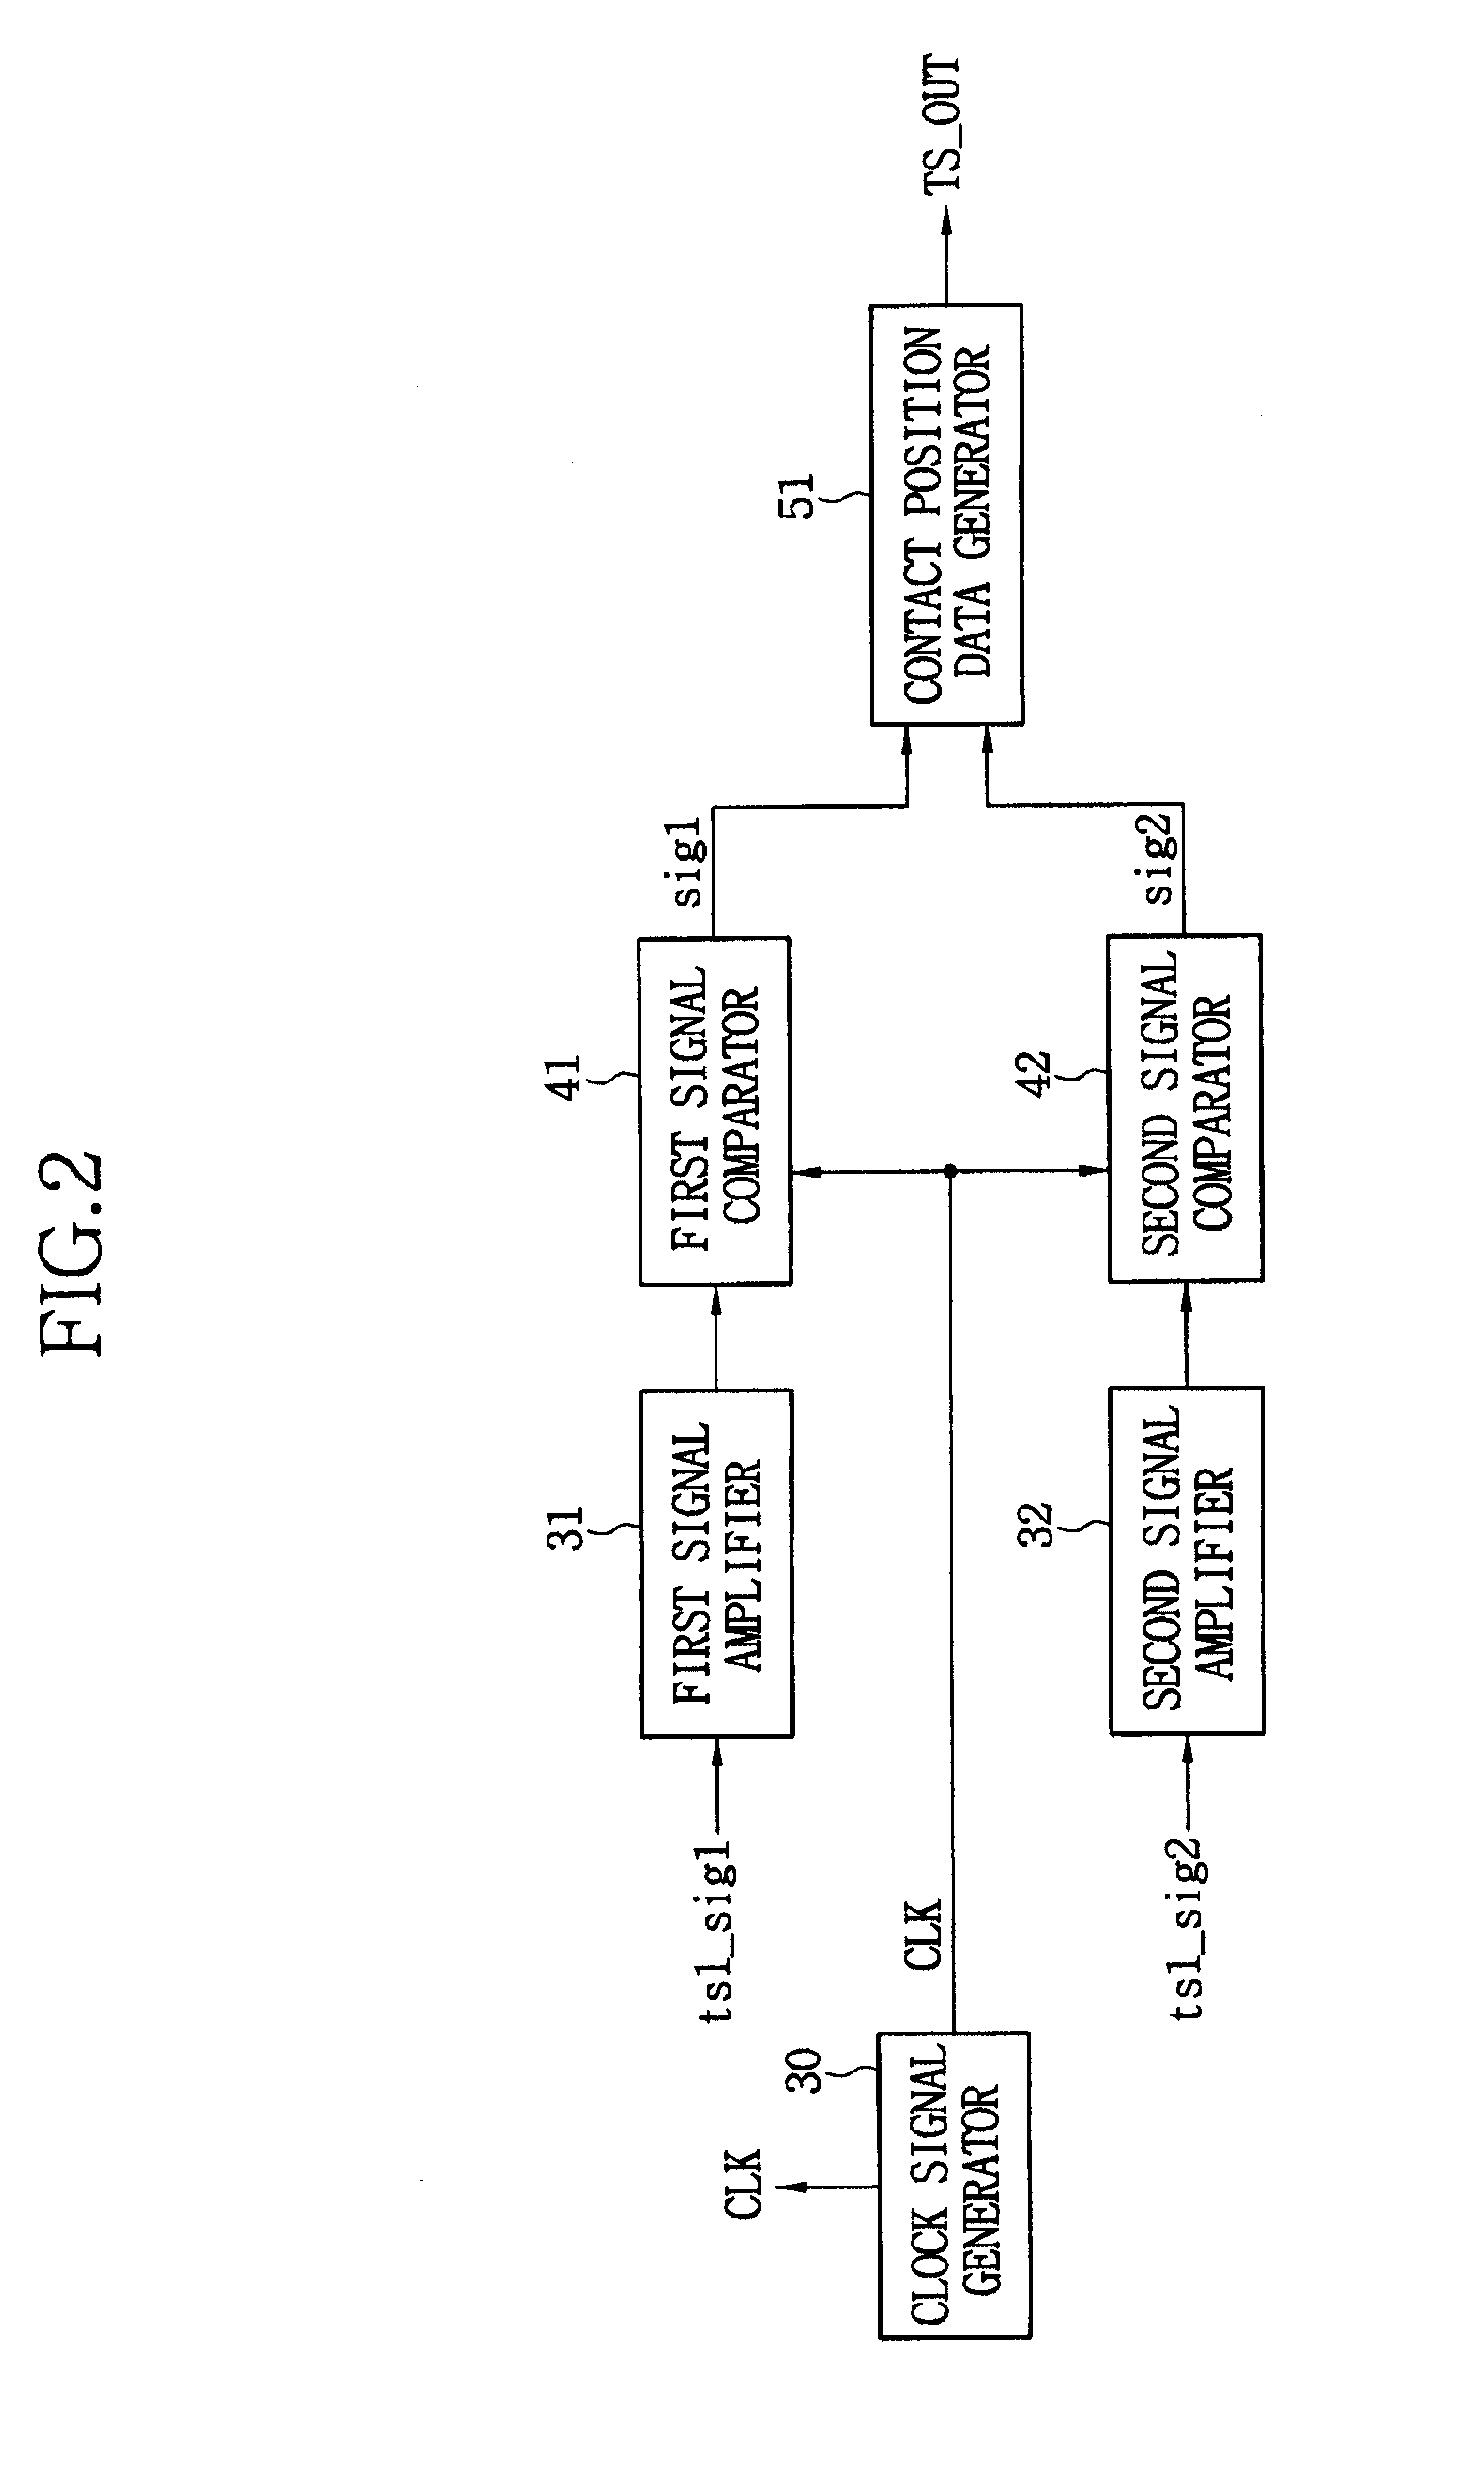 Touch panel apparatus and a method for detecting a contact position on the same